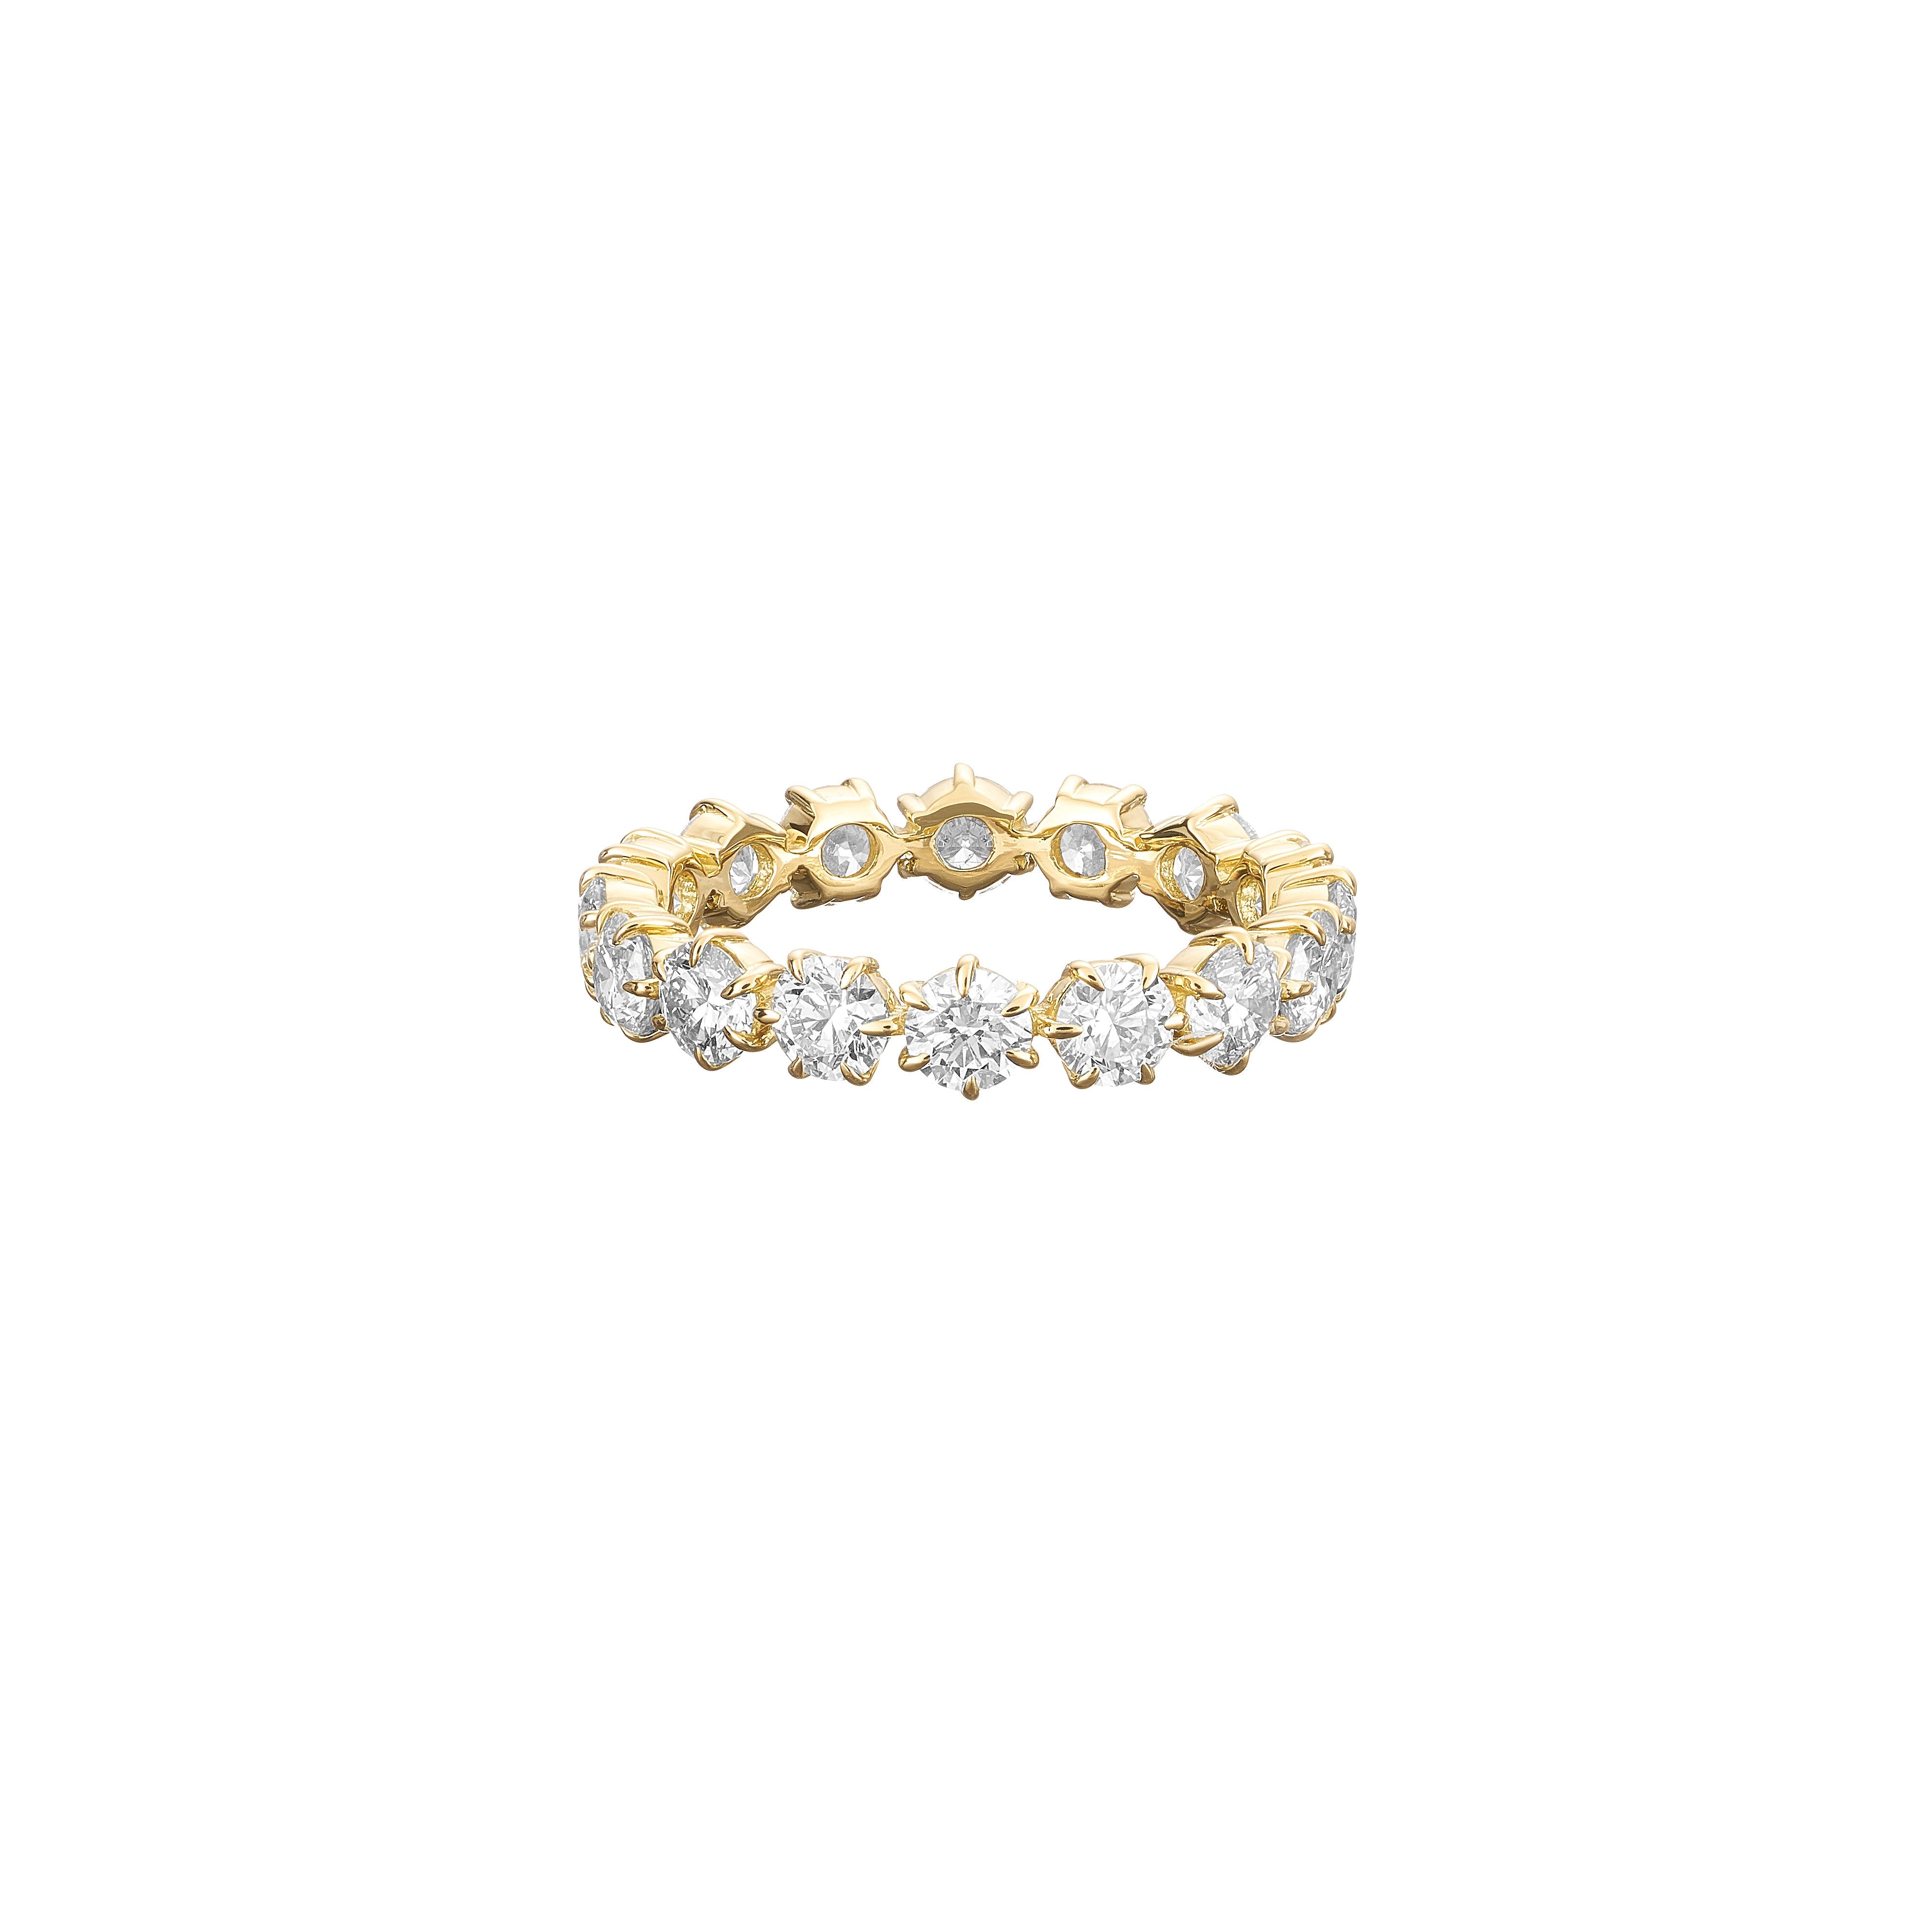 Catherine Eternity No. 3 in 18K Yellow Gold